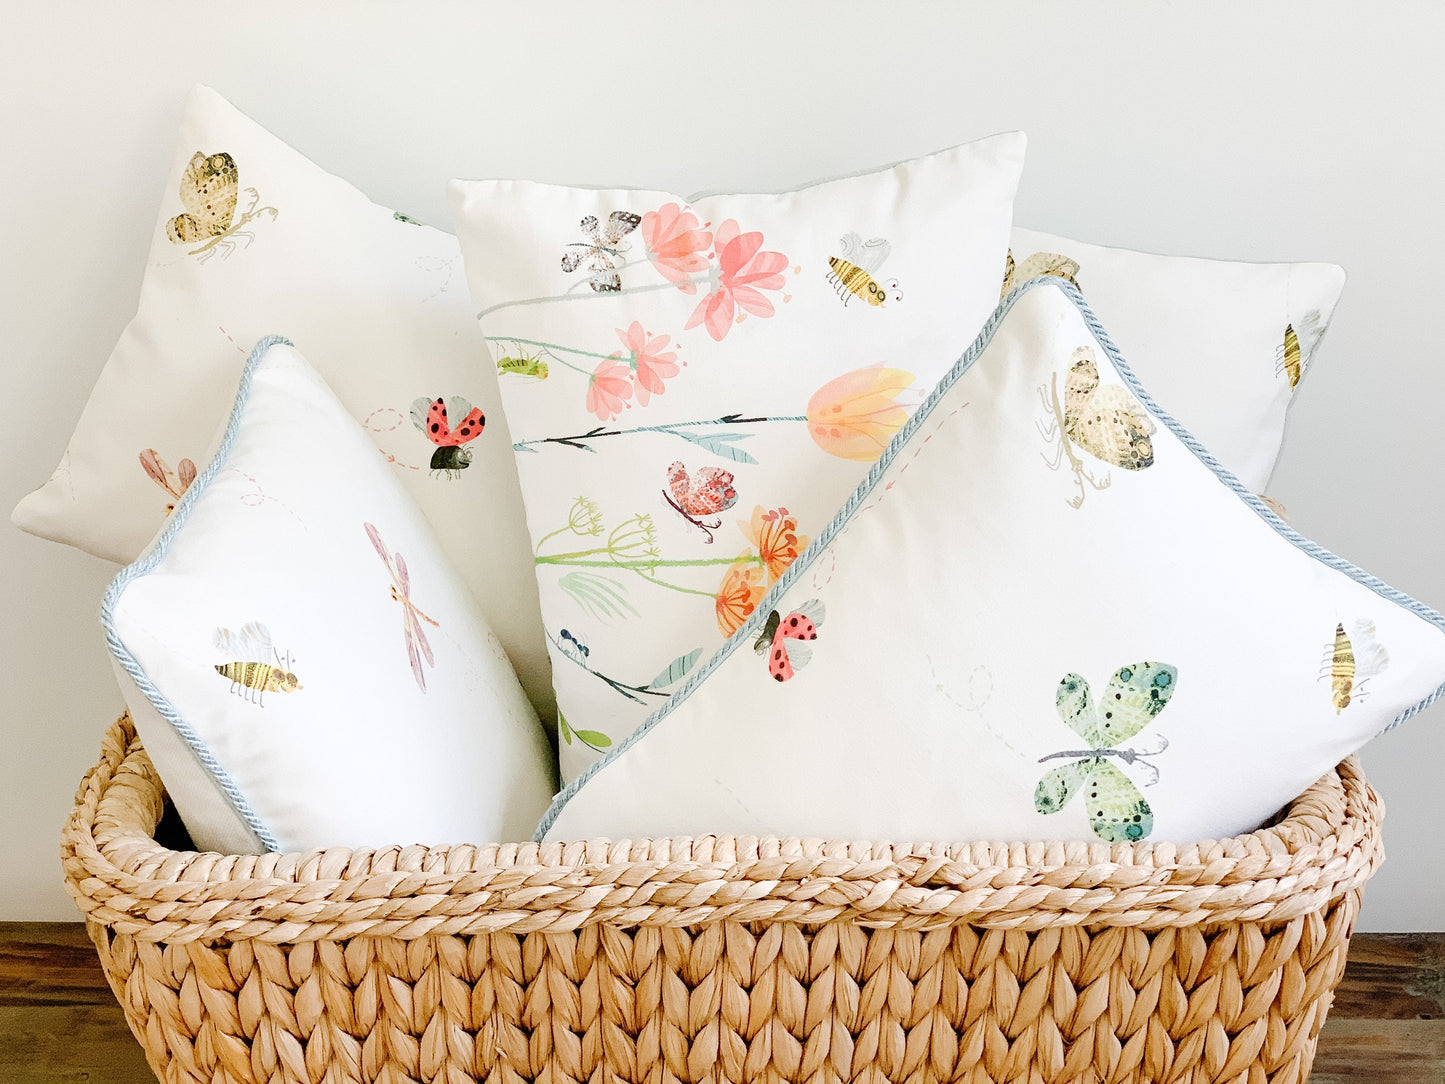 Basket of small lumbar decorative pillows with butterfly motif